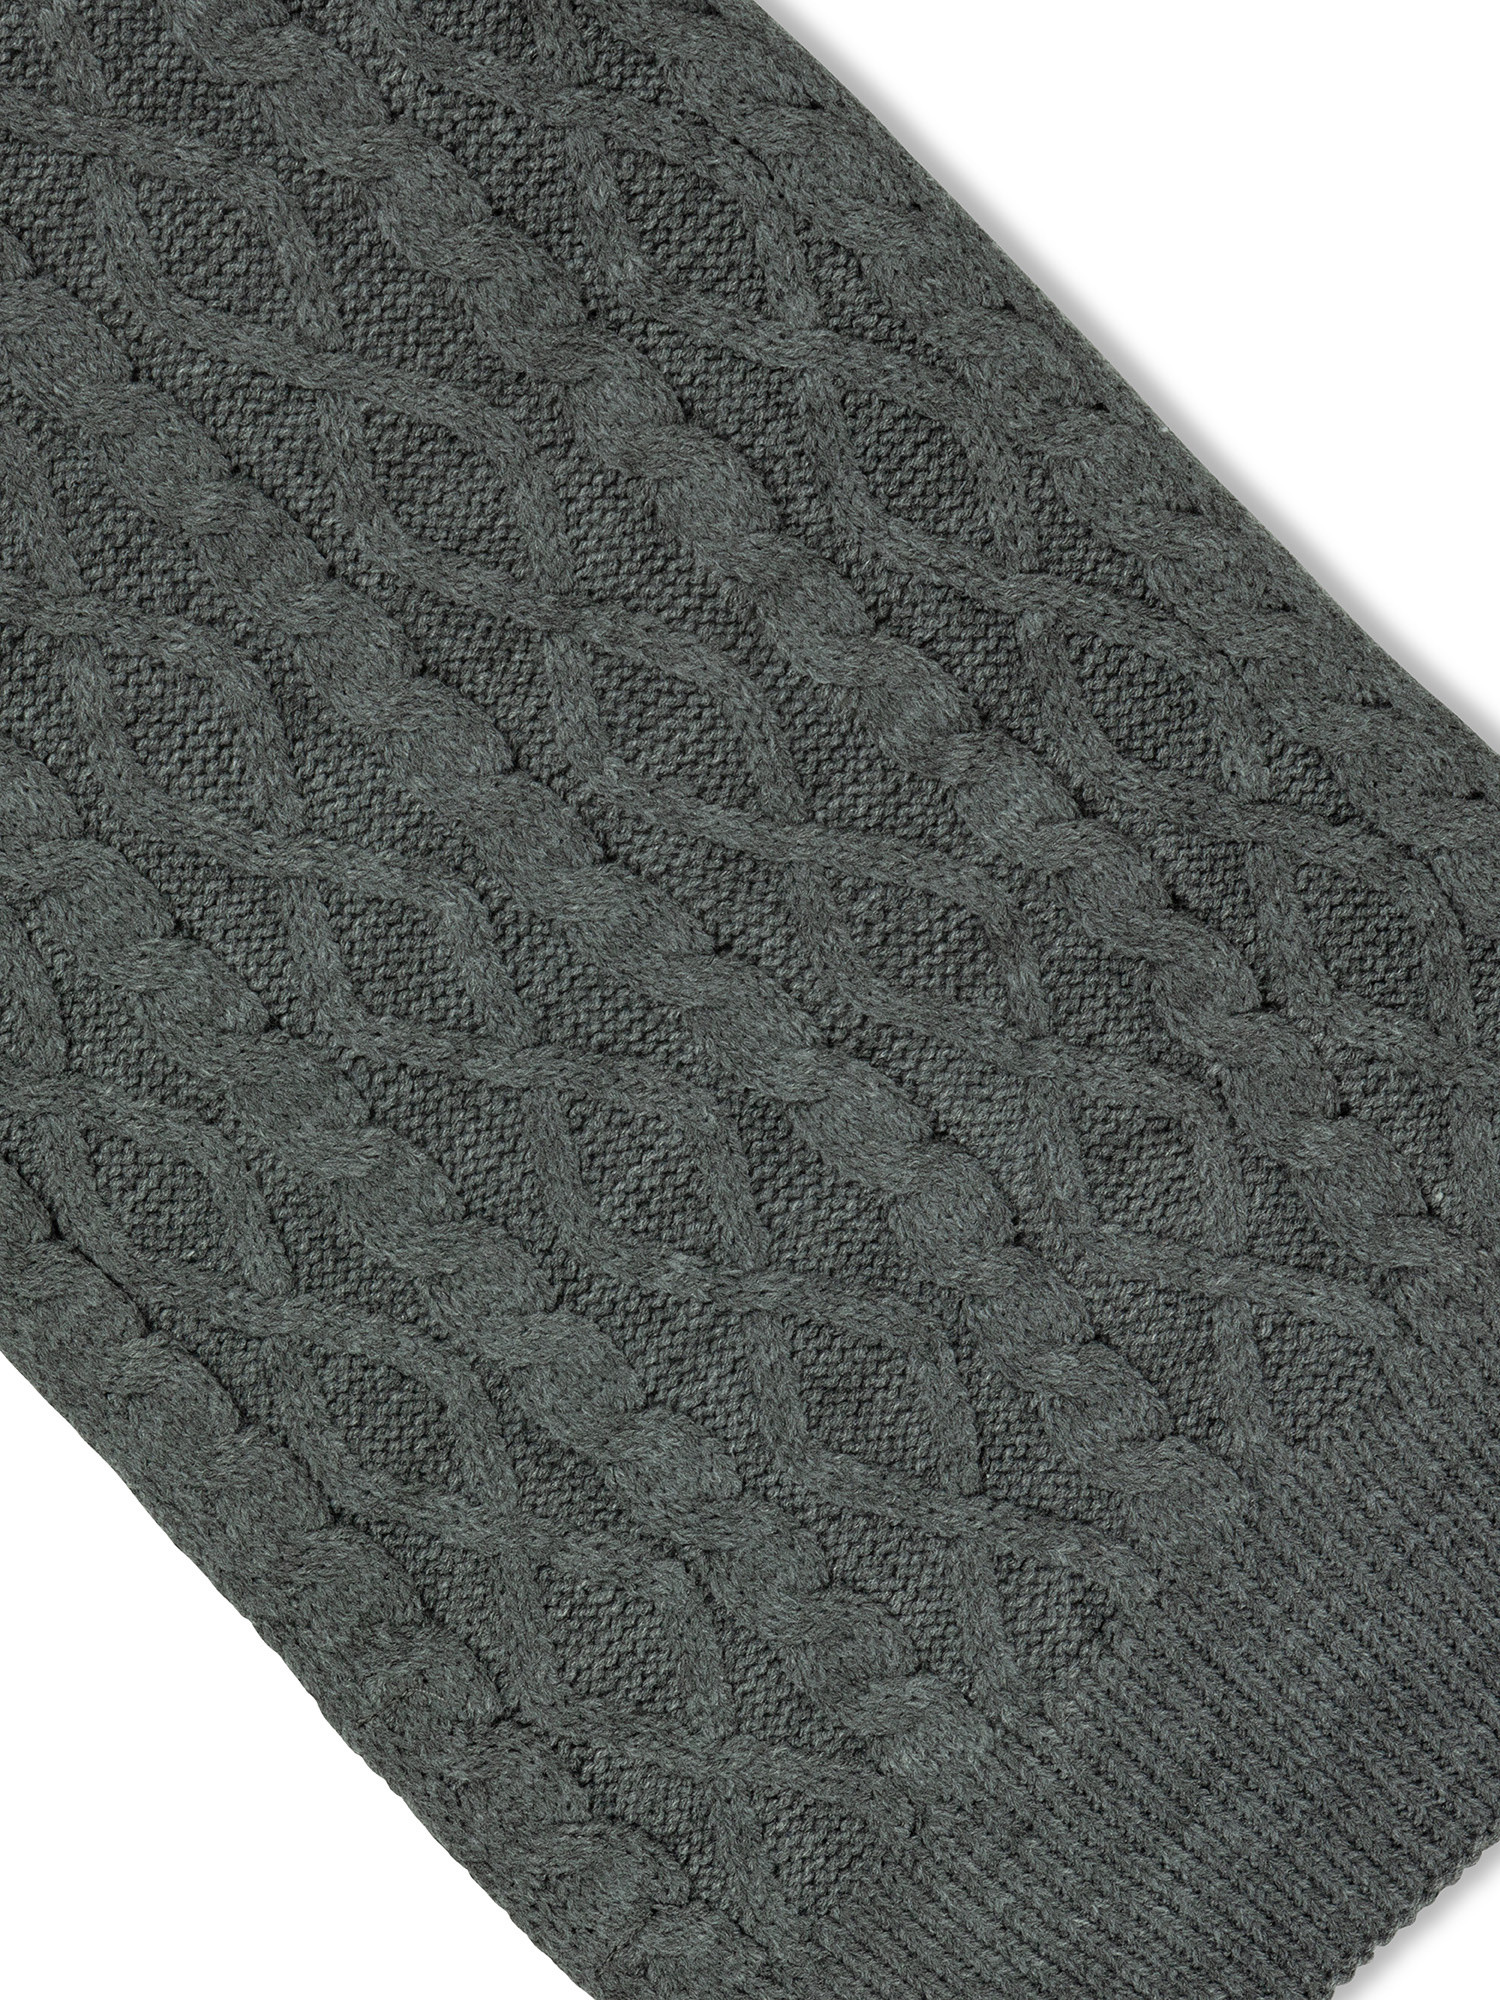 Luca D'Altieri - Scarf with knitted motif, Grey, large image number 1